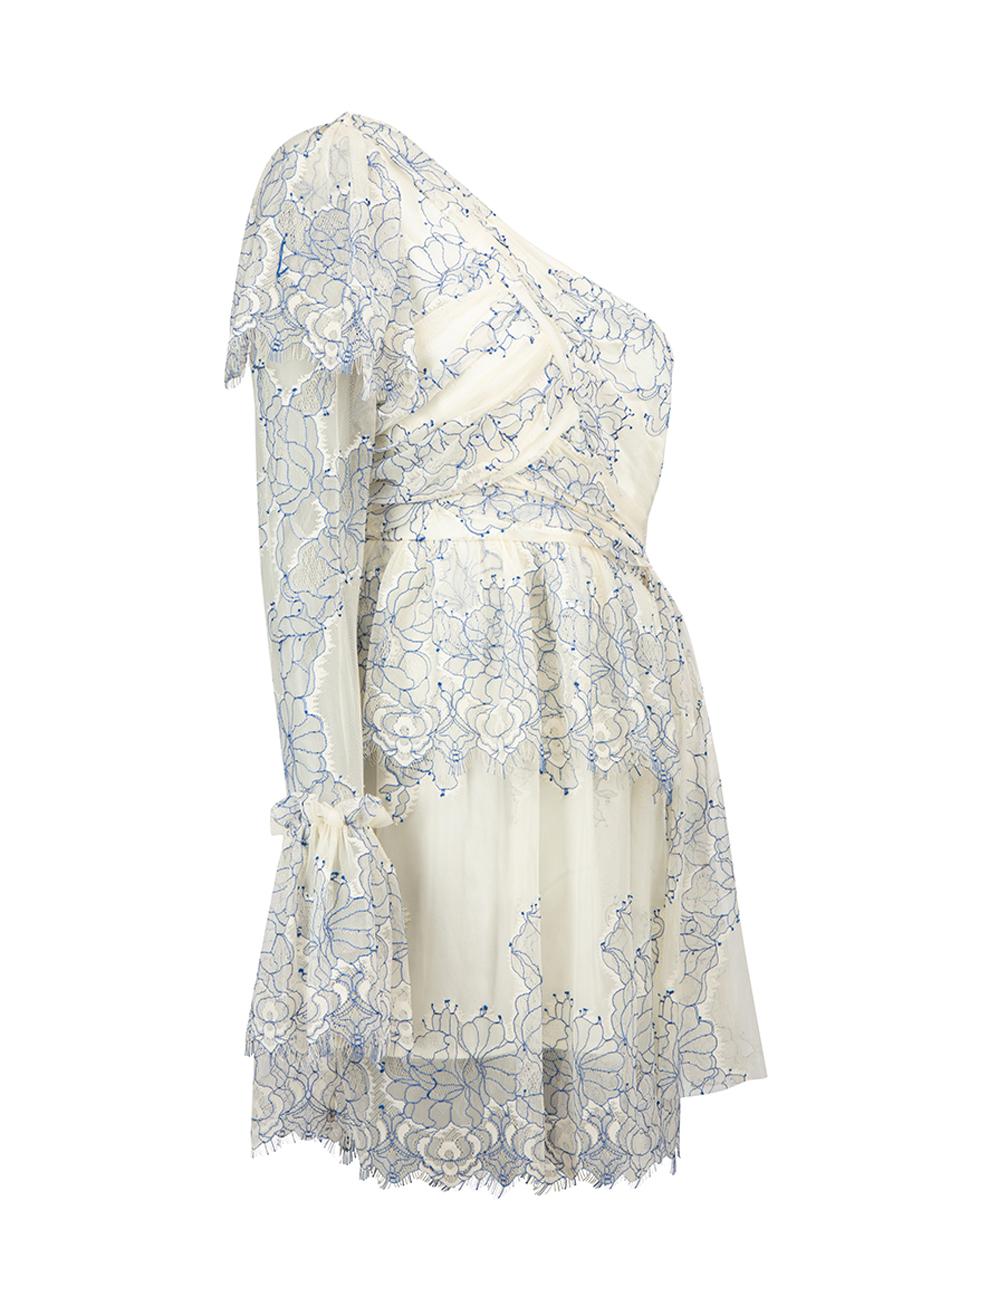 CONDITION is Never worn, with tags. No visible wear to dress is evident on this new Alice McCall designer resale item.



Details


Cream and blue

Synthetic

Mini dress

Blue floral lace pattern

One shoulder

Long mesh see through sleeve

Gathered